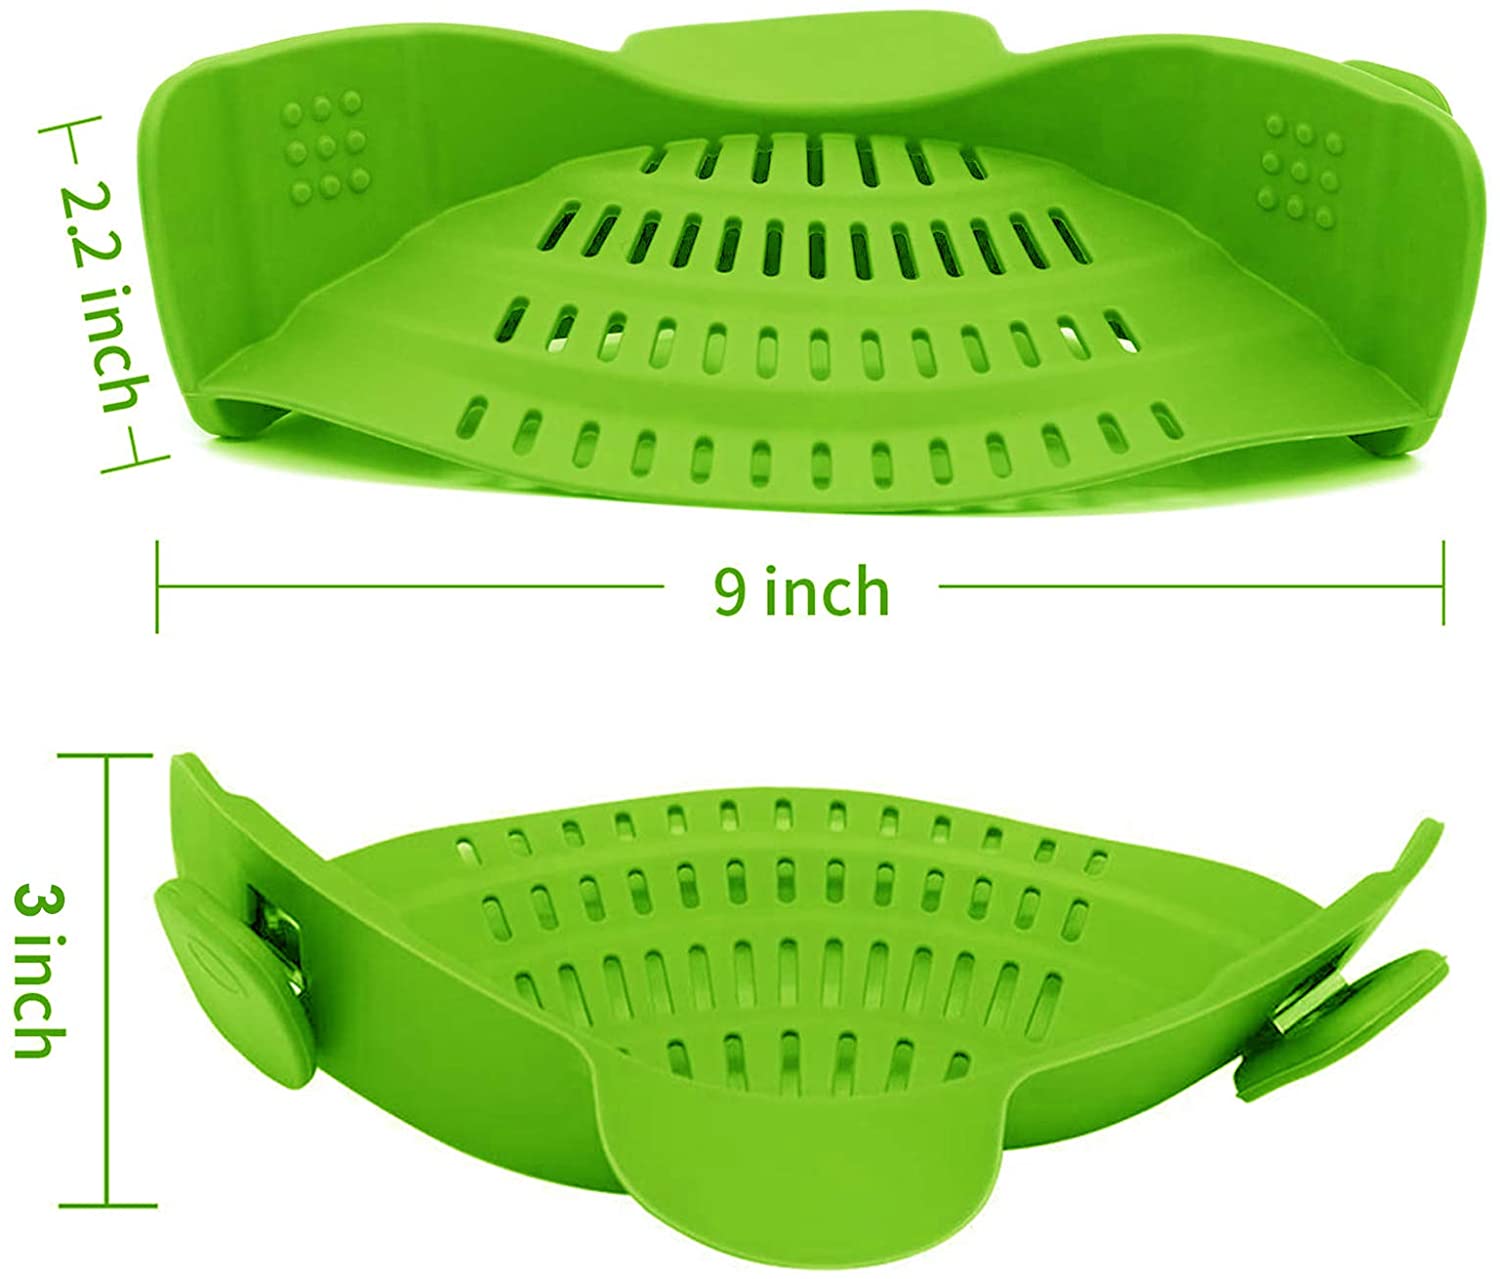 VICVEO Silicone Clip on Strainer, Patented Clip on Silicone Colander, Clip-on Kitchen Food Strainer for Pasta,Fits Almost Pots (Green) - image 5 of 8